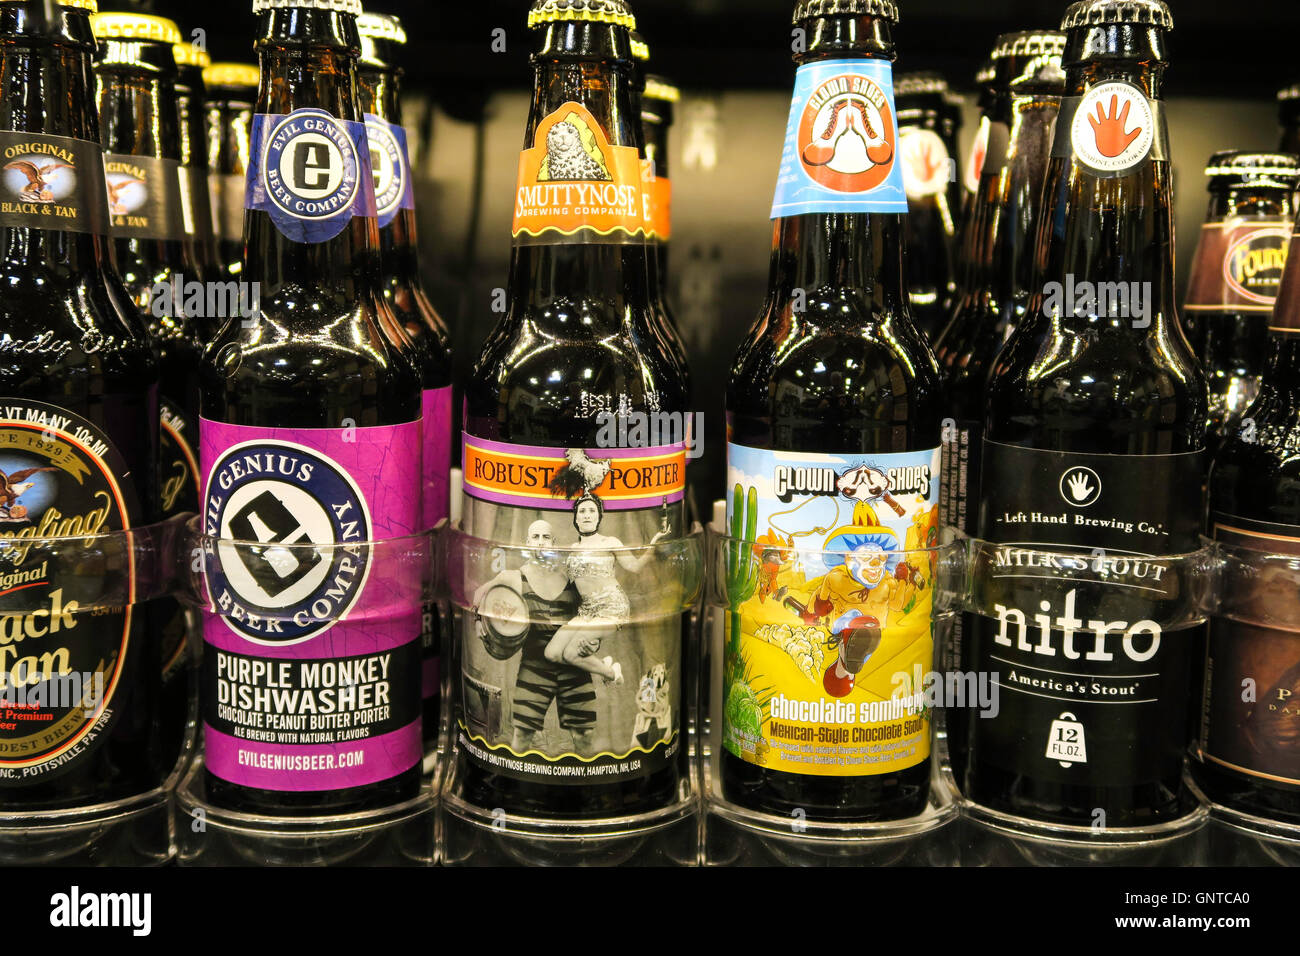 Craft Beer Section at Wegmans Grocery Store, Westwood, Massachusetts, USA Stock Photo